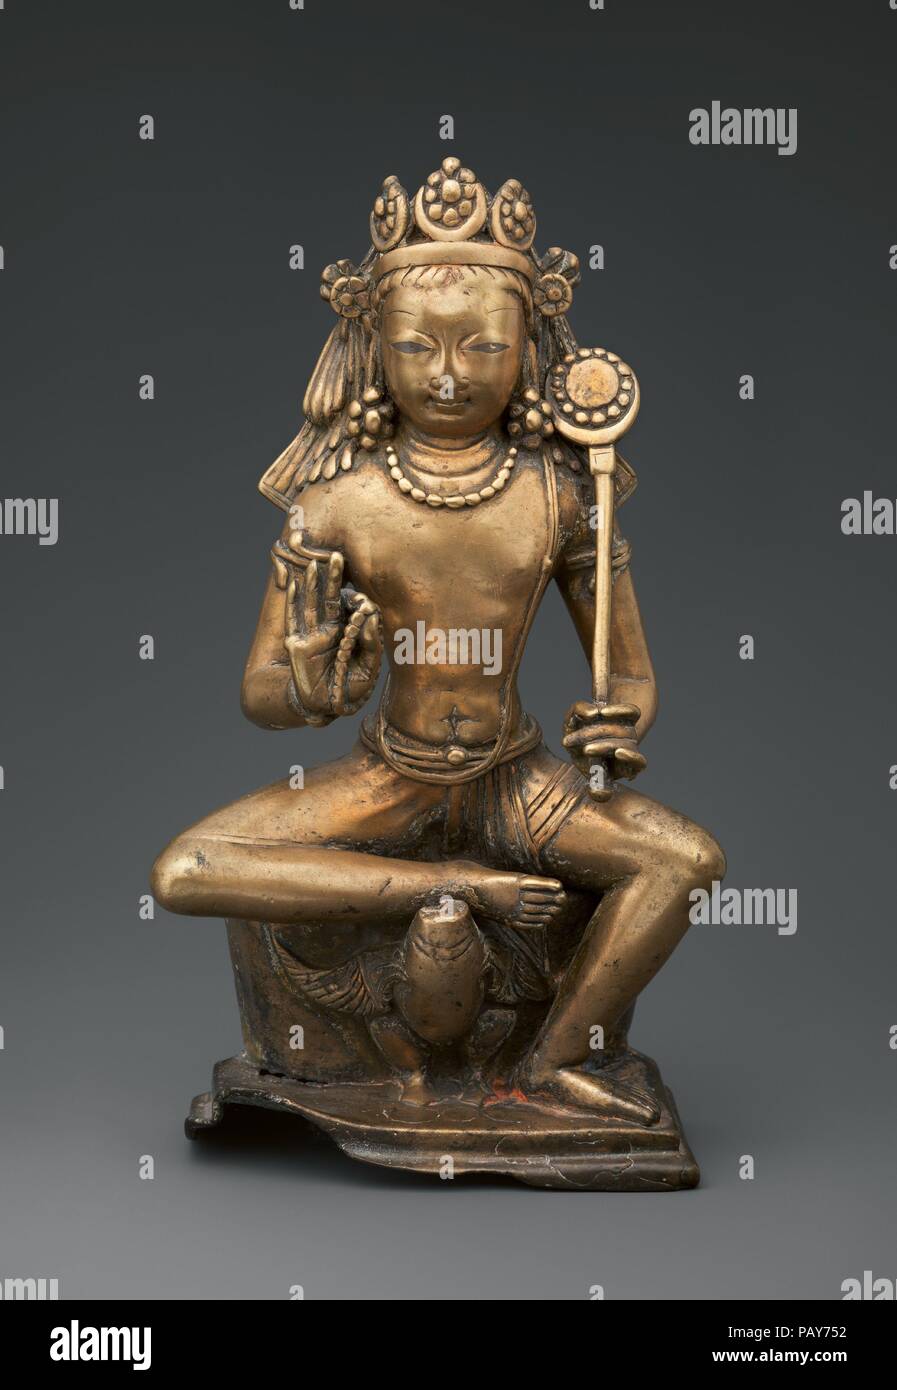 Karttikeya, the God of War. Culture: India (Jammu and Kashmir, ancient kingdom of Kashmir). Dimensions: H. 10 1/2 × W. 6 1/4 × D. 3 in. (26.7 × 15.9 × 7.6 cm). Date: 8th century.  Here, the god of war sits regally on his vehicle, a peacock, as if enthroned. He displays the rosary (aksamala) favored by his father, Shiva, and, instead of his usual javelin, holds a disk standard seemingly with solar symbolism. This iconography is unprecedented. Museum: Metropolitan Museum of Art, New York, USA. Stock Photo